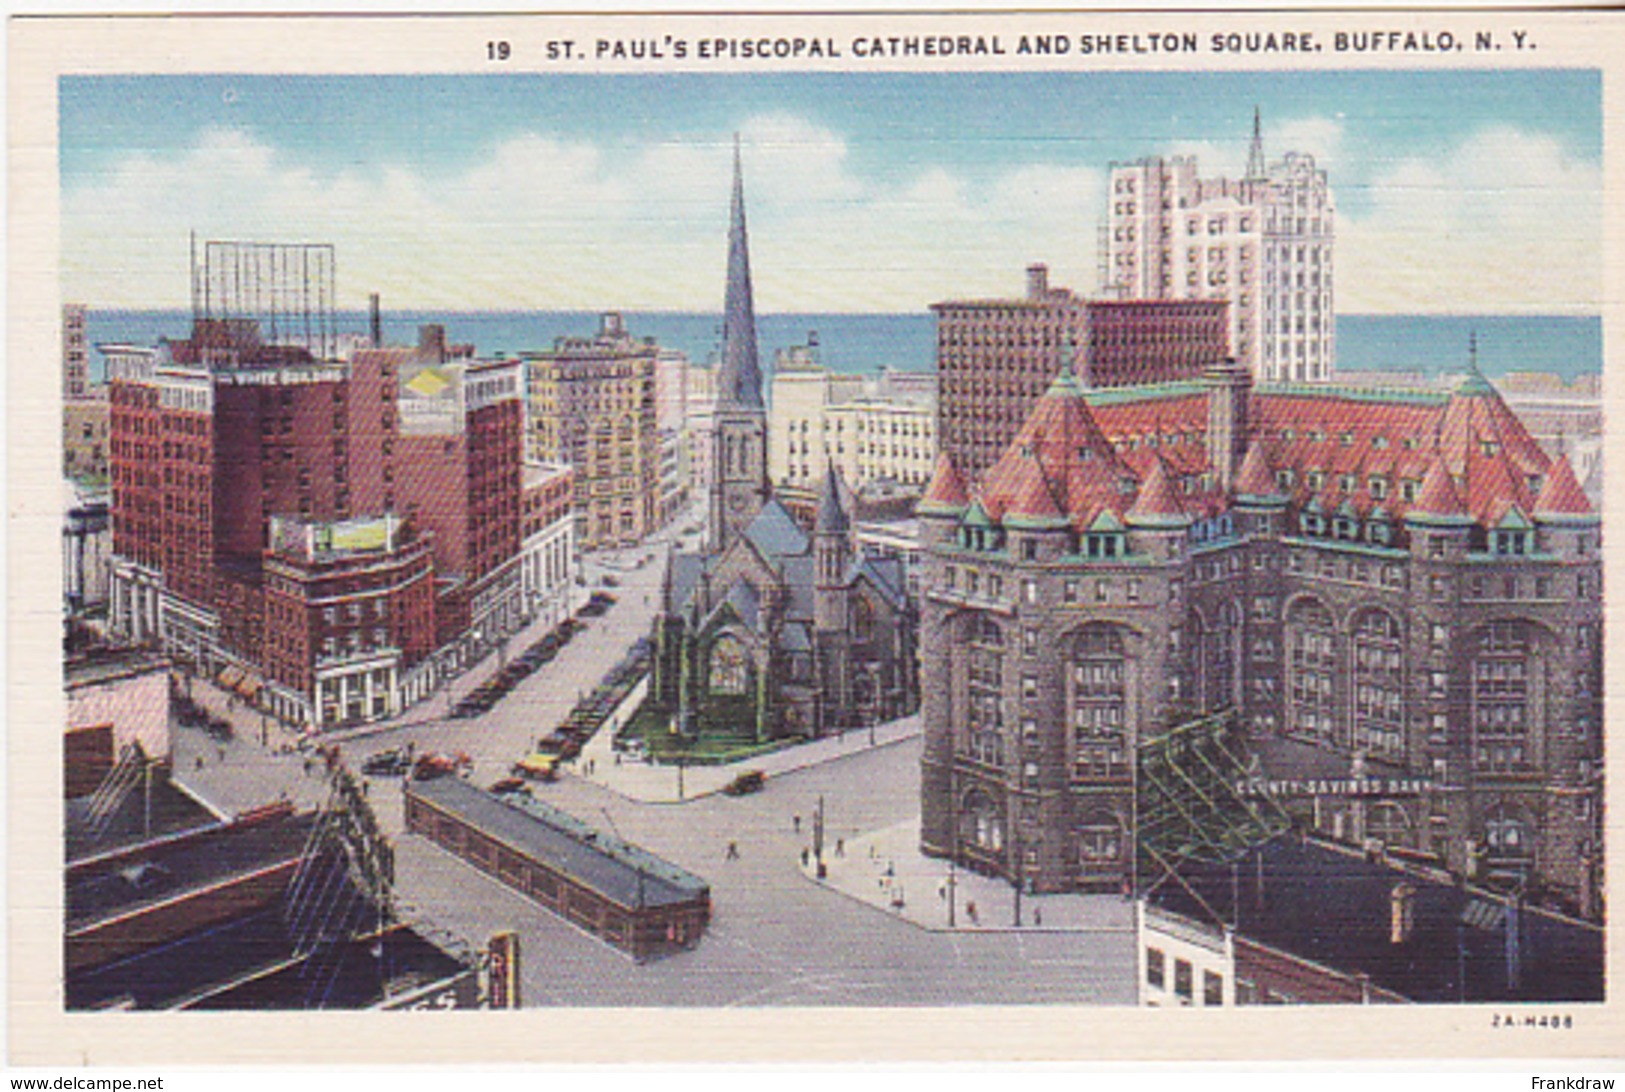 Postcard - St. Paul's Episcopal Cathedral And Shelton Square, Buffalo, N.Y - Card No. 2A-H488 - VG - Unclassified